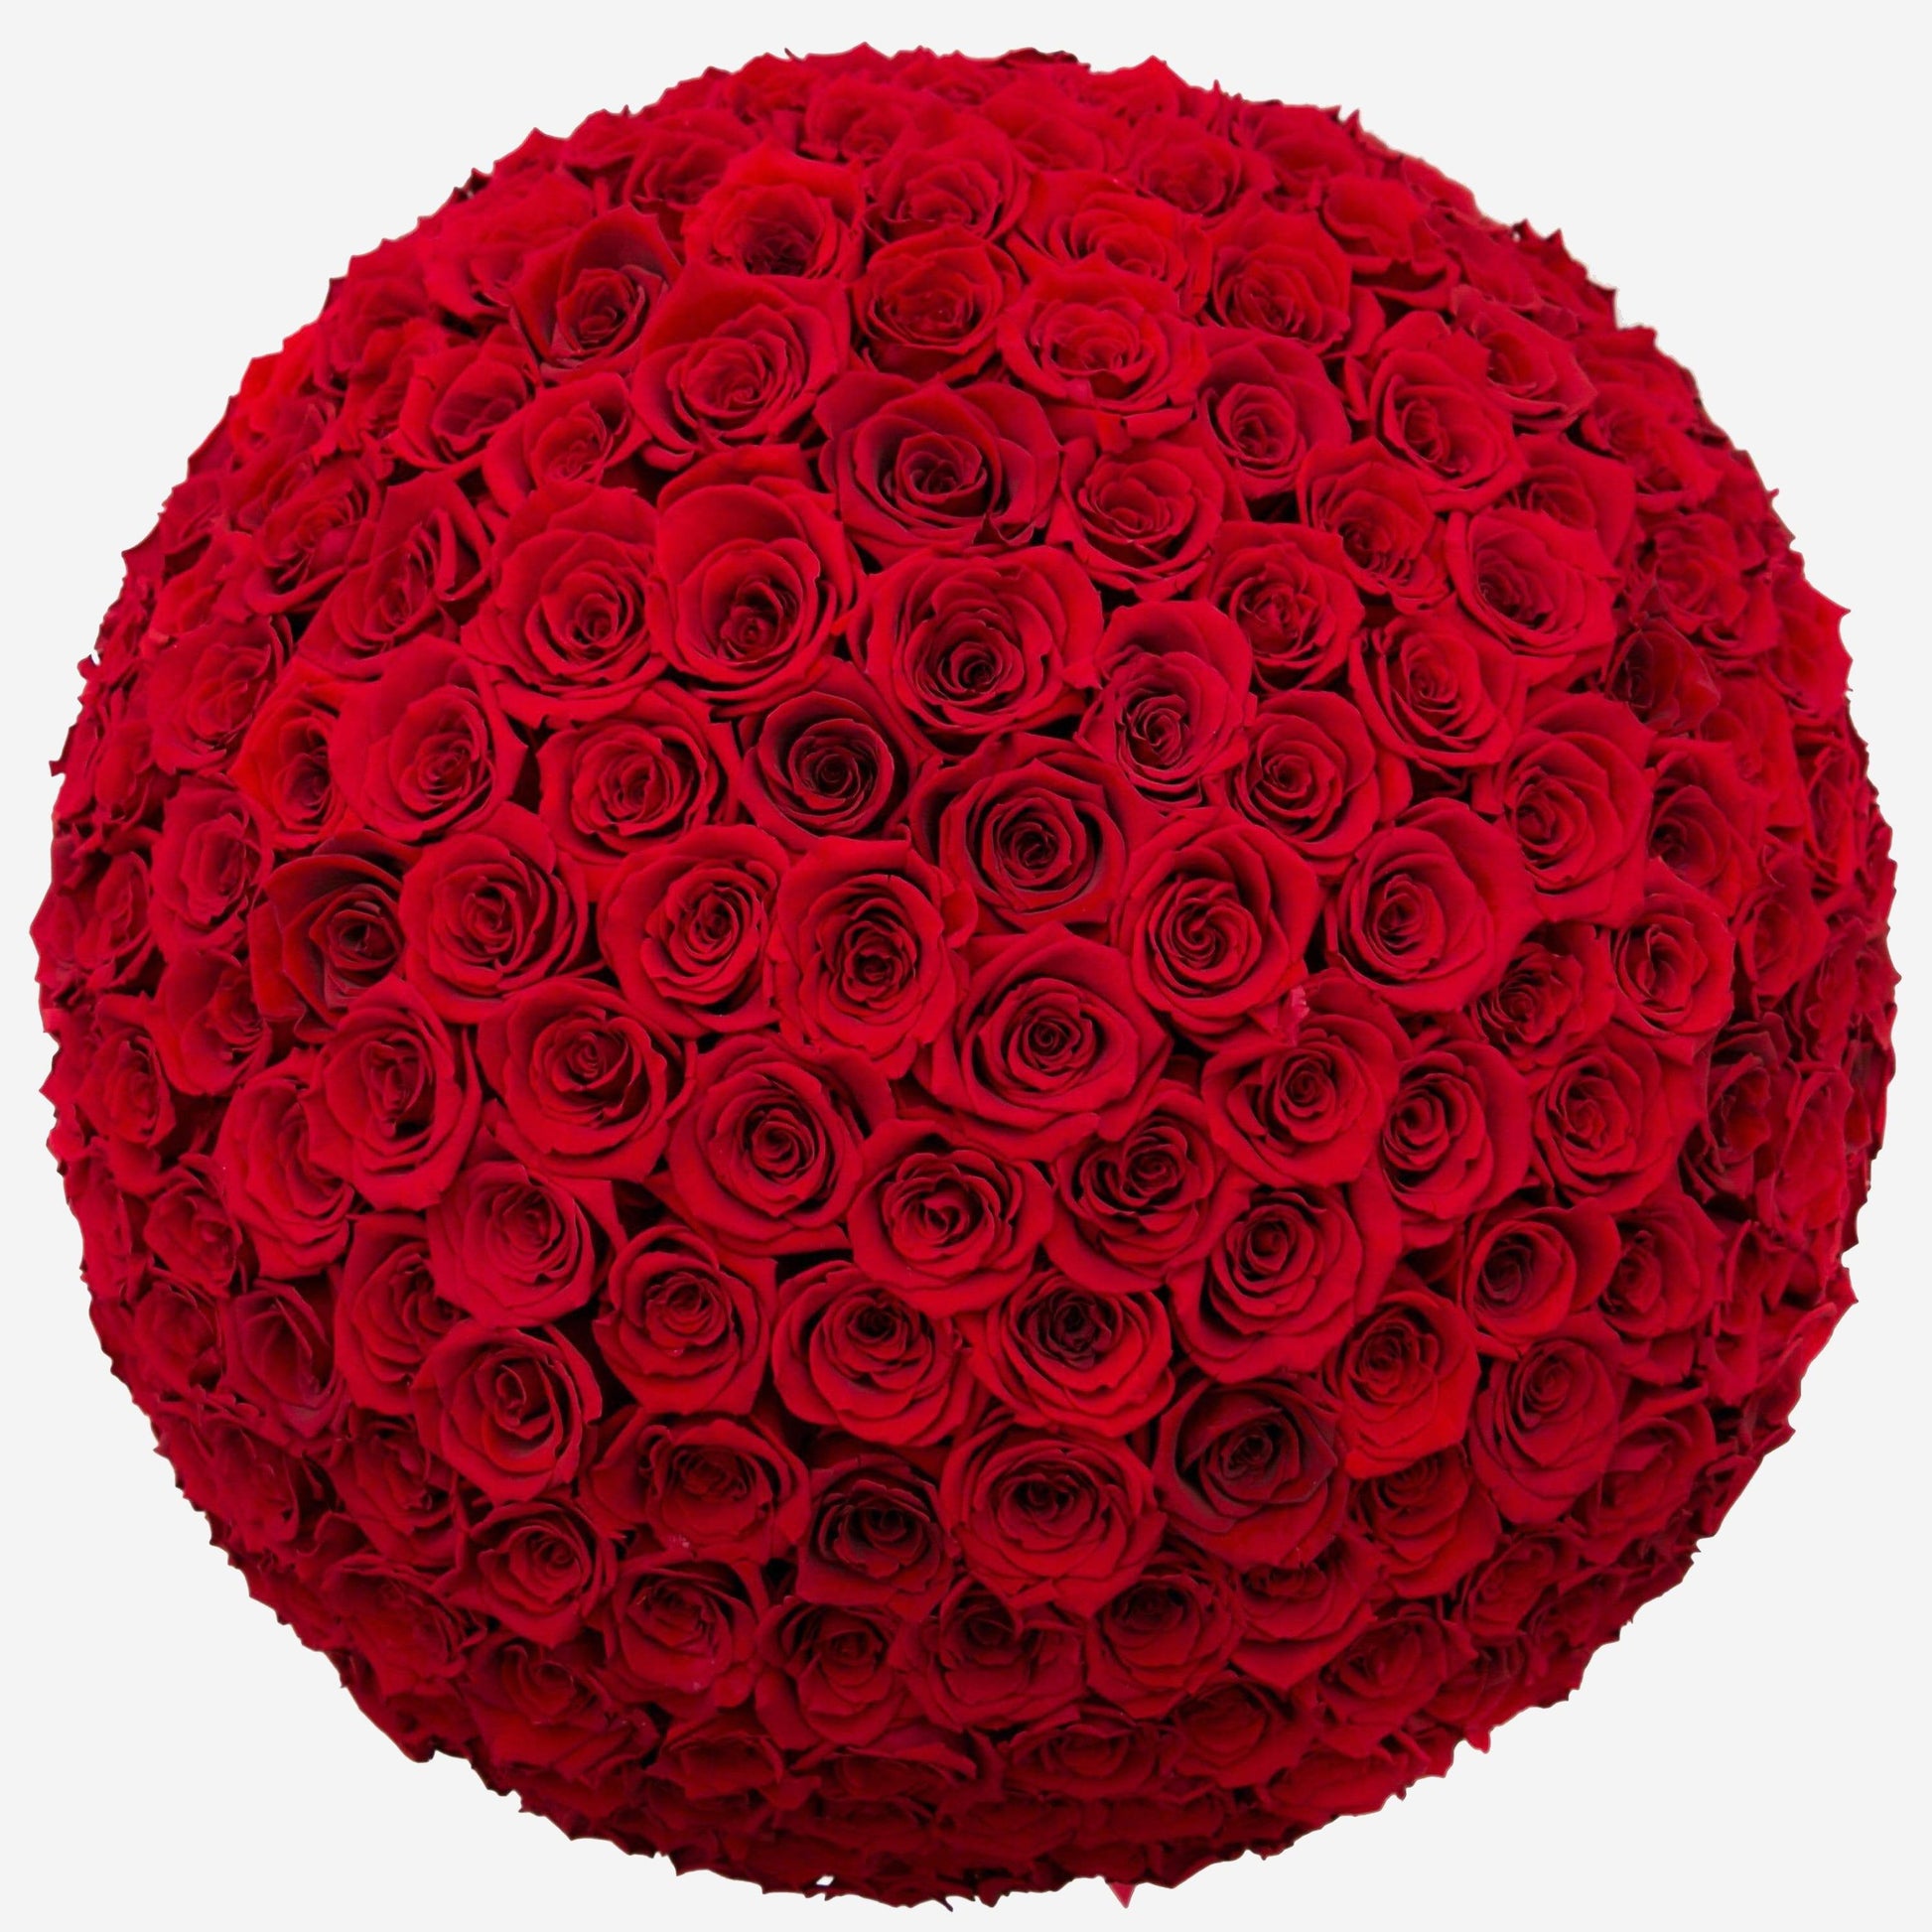 Deluxe White Dome Box | Bright Red Roses | The Million Roses